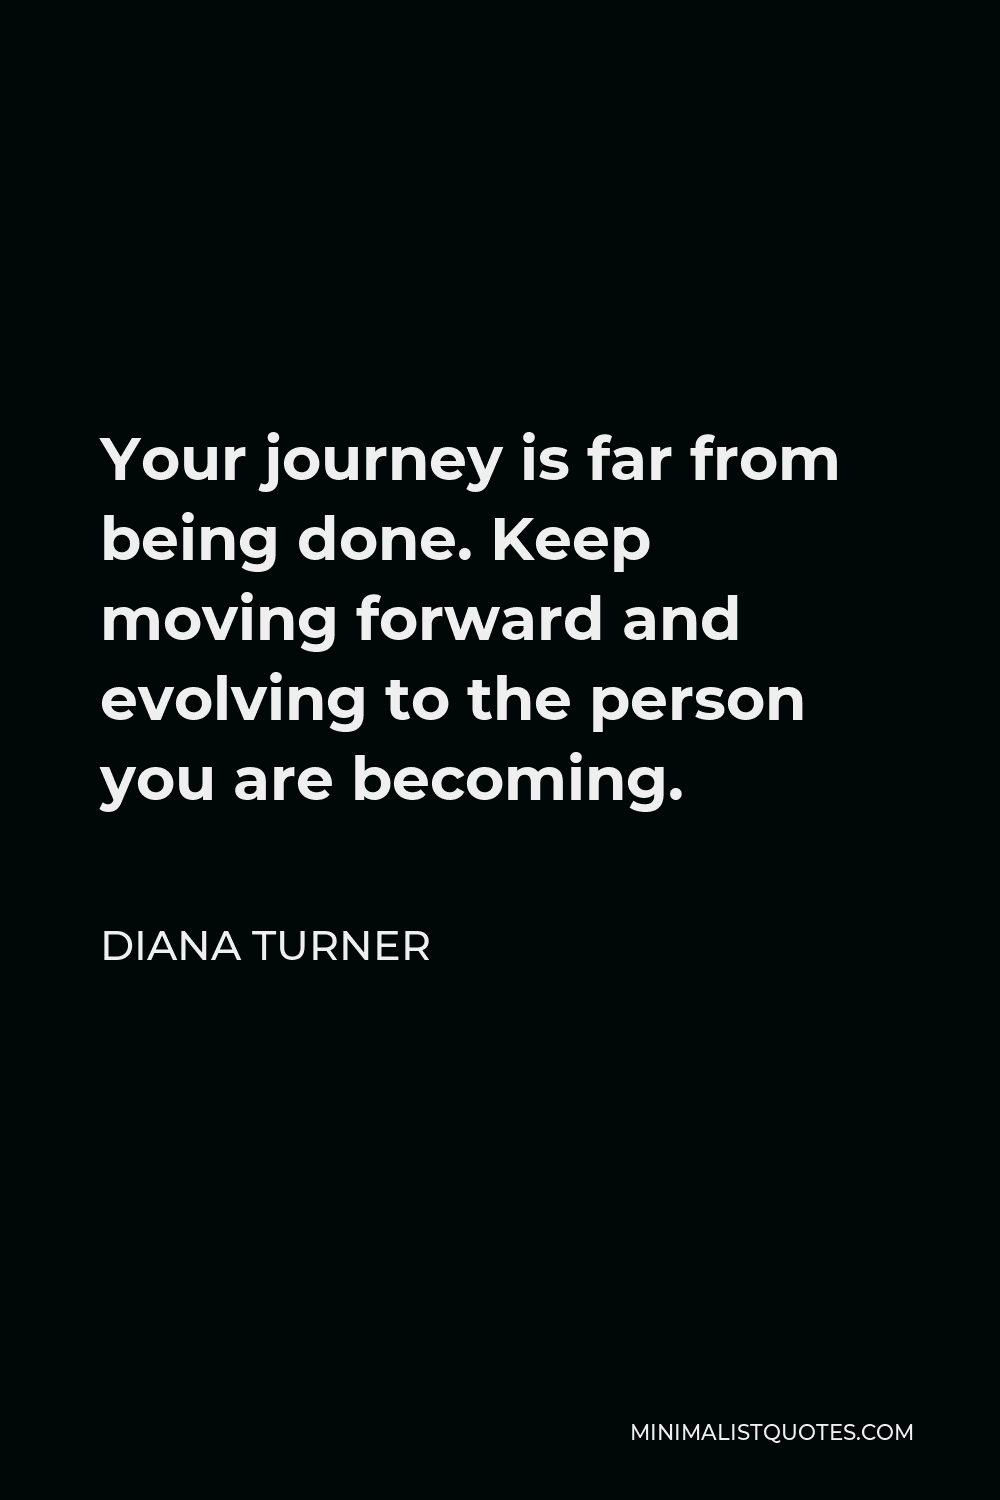 Diana Turner Quote - Your journey is far from being done. Keep moving forward and evolving to the person you are becoming.